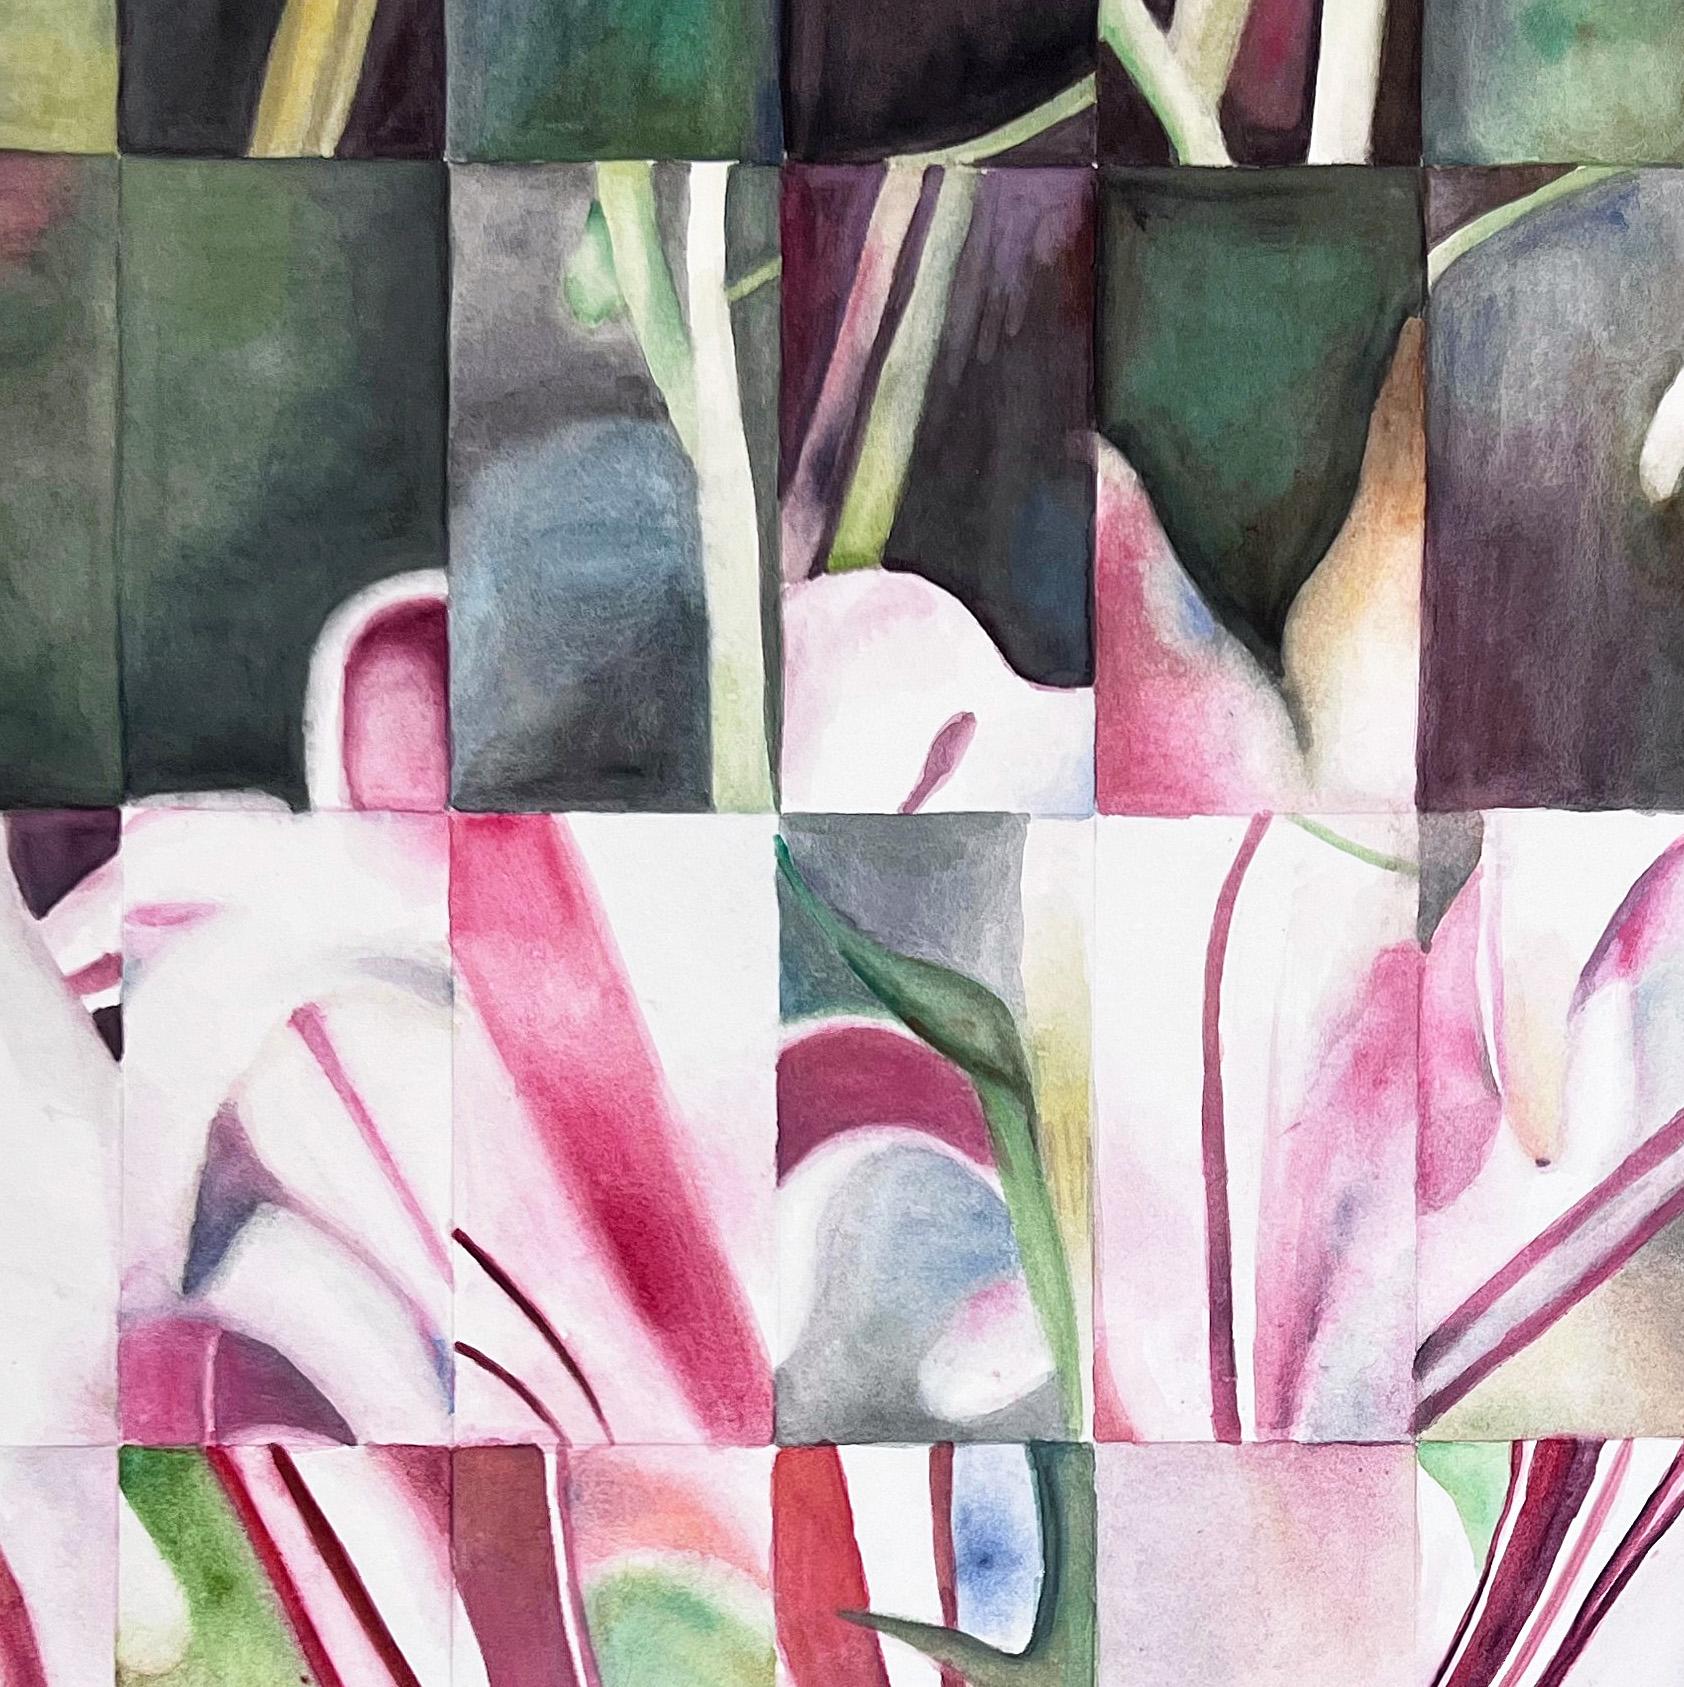 This is a one of a kind original watercolor on BFK paper painting by San Diego artist, Stefanie Bales. 
Its dimensions are 24x36 inches. It is matted and framed. 

The artist has depicted lilies in cubist style by distorting the image into blocks.